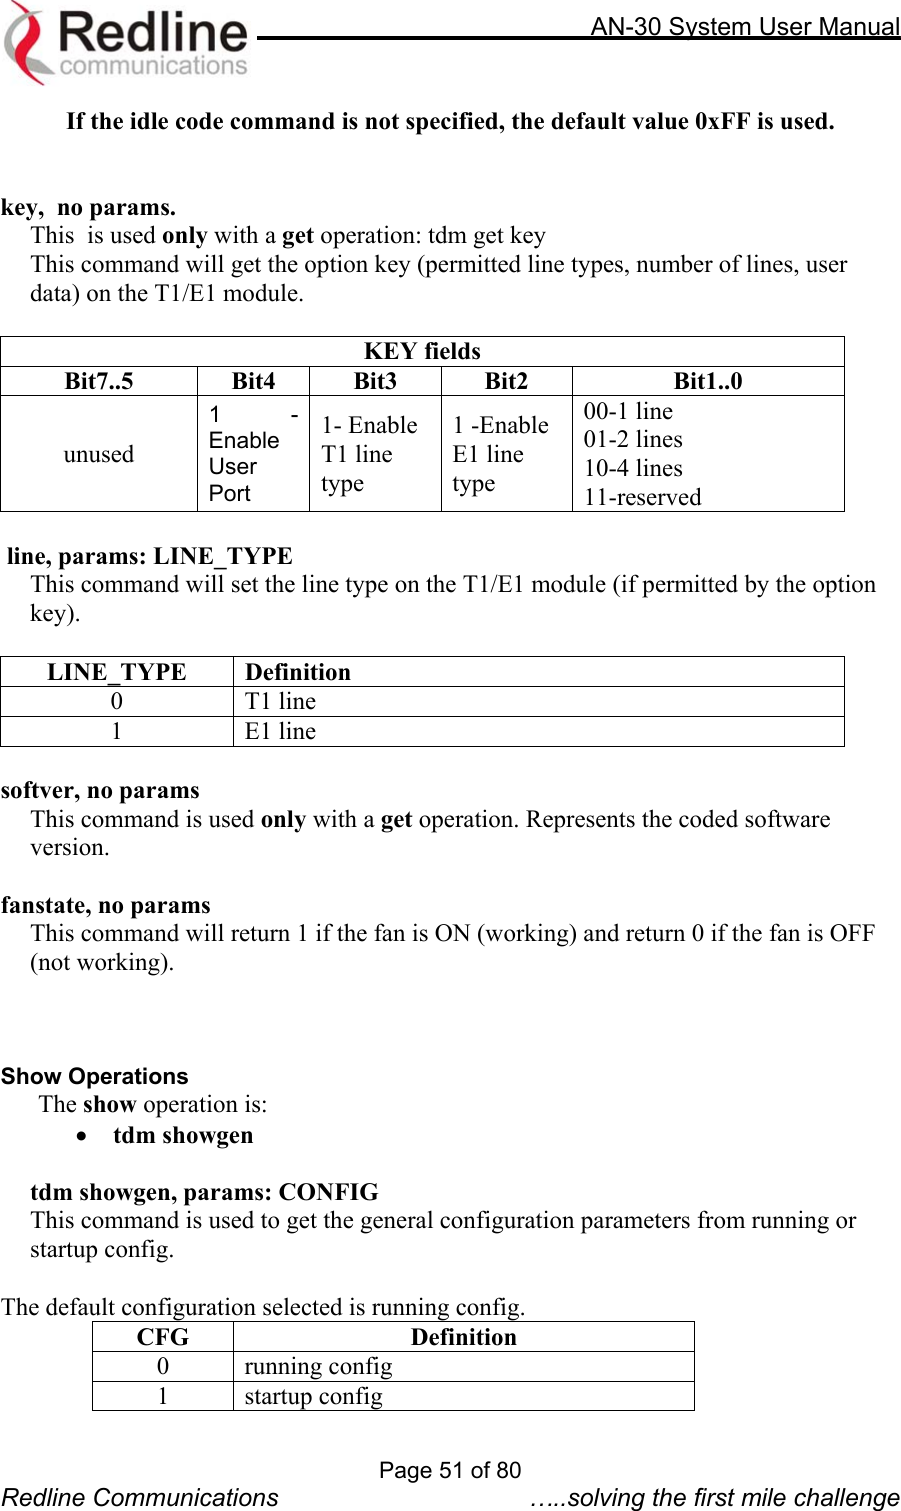     AN-30 System User Manual  If the idle code command is not specified, the default value 0xFF is used.   key,  no params.    This  is used only with a get operation: tdm get key This command will get the option key (permitted line types, number of lines, user data) on the T1/E1 module.  KEY fields Bit7..5 Bit4 Bit3 Bit2  Bit1..0 unused 1 - Enable User Port 1- Enable T1 line type 1 -Enable E1 line type 00-1 line 01-2 lines 10-4 lines 11-reserved   line, params: LINE_TYPE This command will set the line type on the T1/E1 module (if permitted by the option key).   LINE_TYPE Definition 0 T1 line 1 E1 line  softver, no params     This command is used only with a get operation. Represents the coded software version.  fanstate, no params  This command will return 1 if the fan is ON (working) and return 0 if the fan is OFF (not working).    Show Operations The show operation is: •  tdm showgen  tdm showgen, params: CONFIG This command is used to get the general configuration parameters from running or startup config.  The default configuration selected is running config. CFG Definition 0 running config 1 startup config Page 51 of 80 Redline Communications  …..solving the first mile challenge 